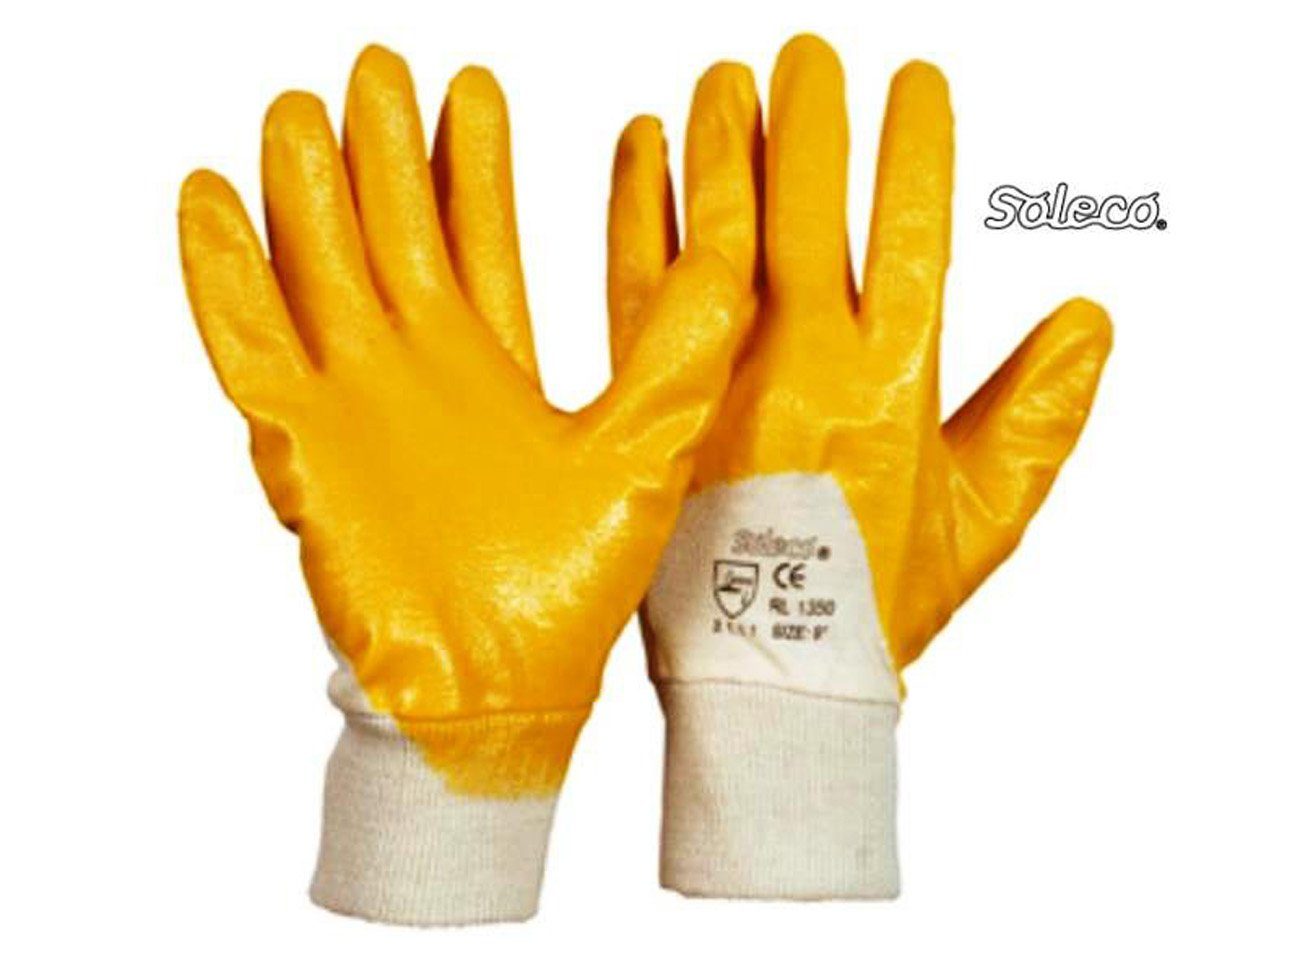 Leipold + Döhle Montage-Handschuhe 12 Paar LEIPOLD Nitril Arbeitshandschuhe Soleco…